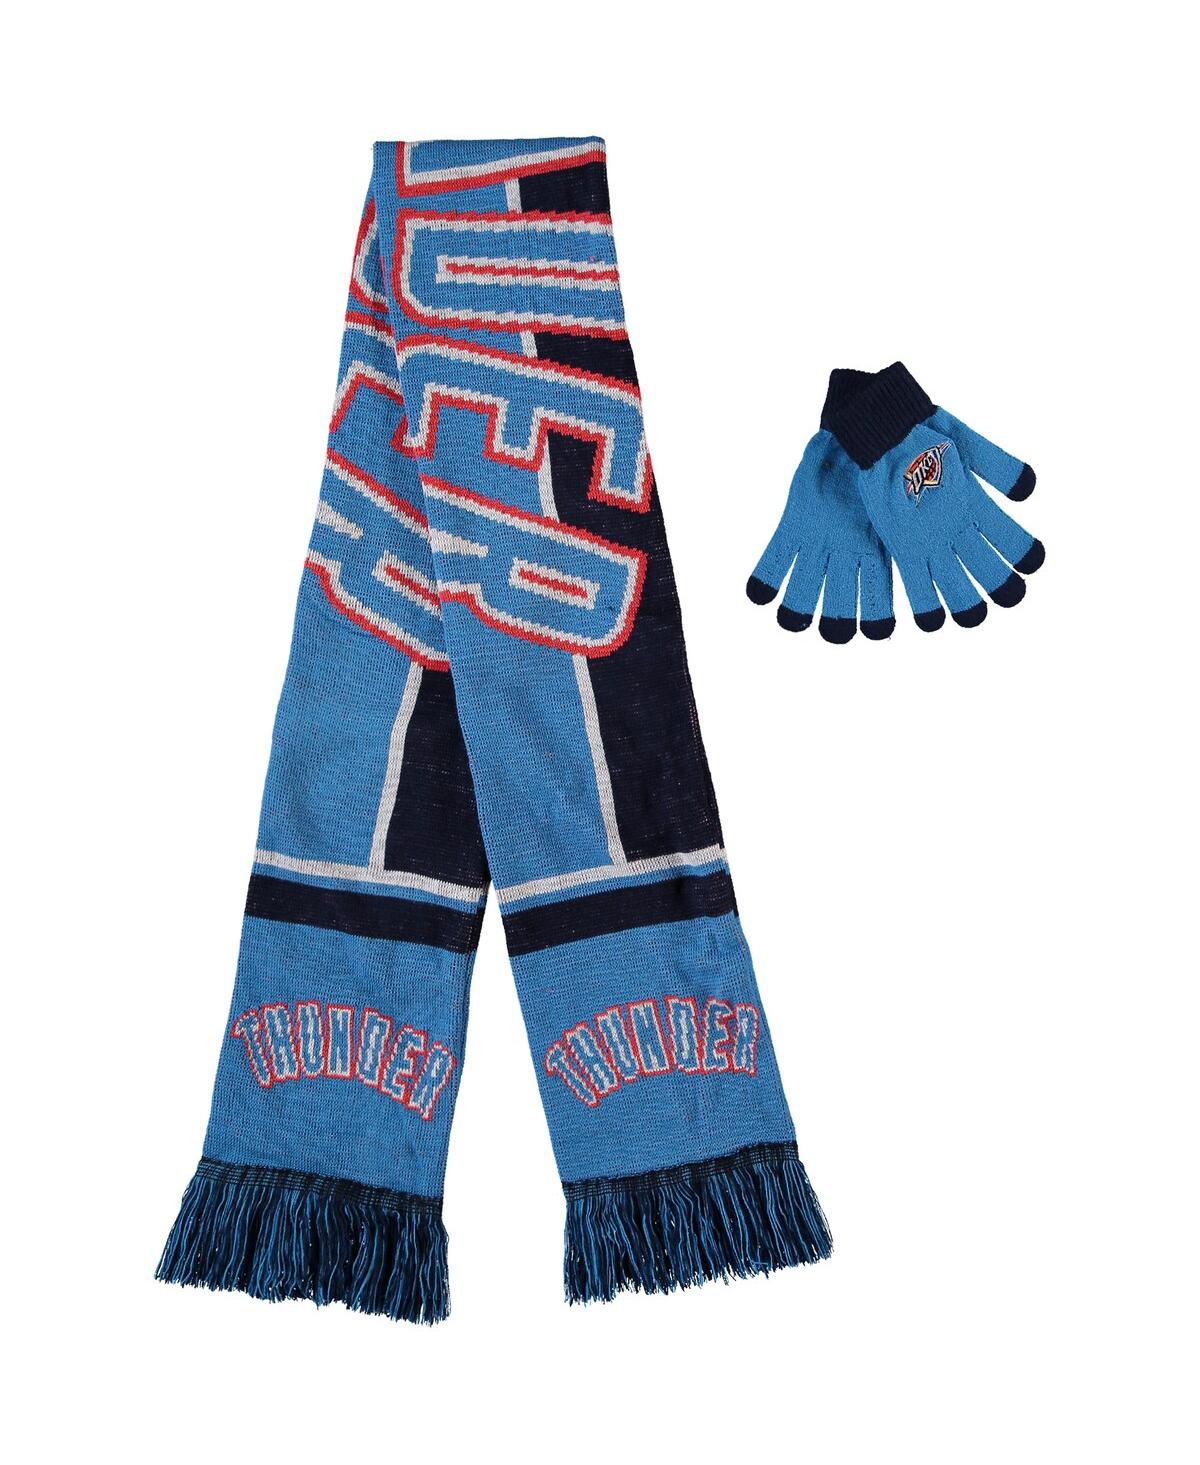 Men's and Women's Oklahoma City Thunder Hol Gloves and Scarf Set - Multi